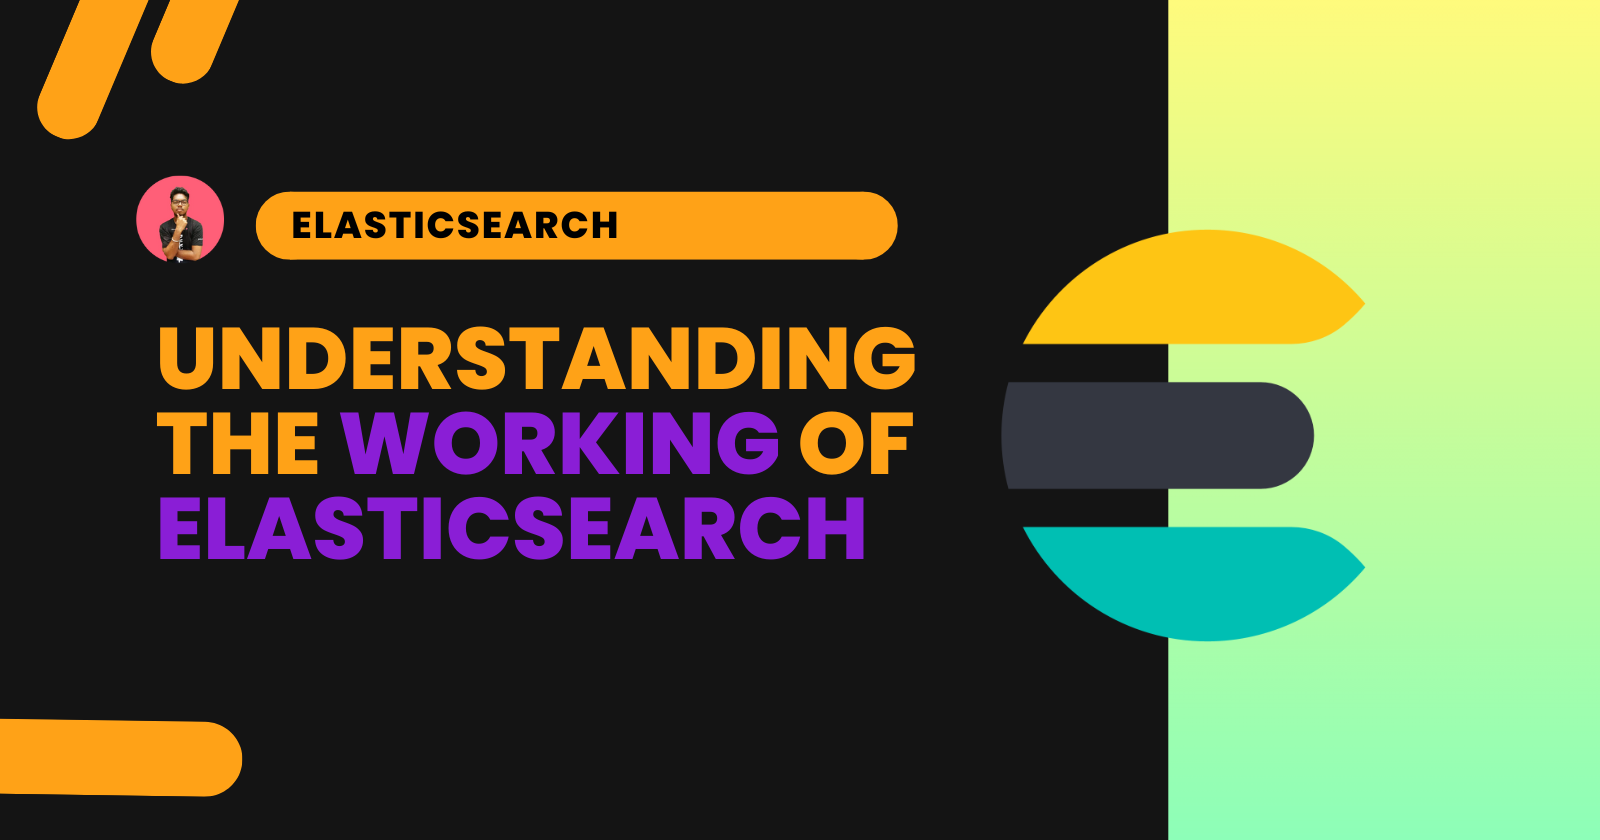 How does Elasticsearch works?